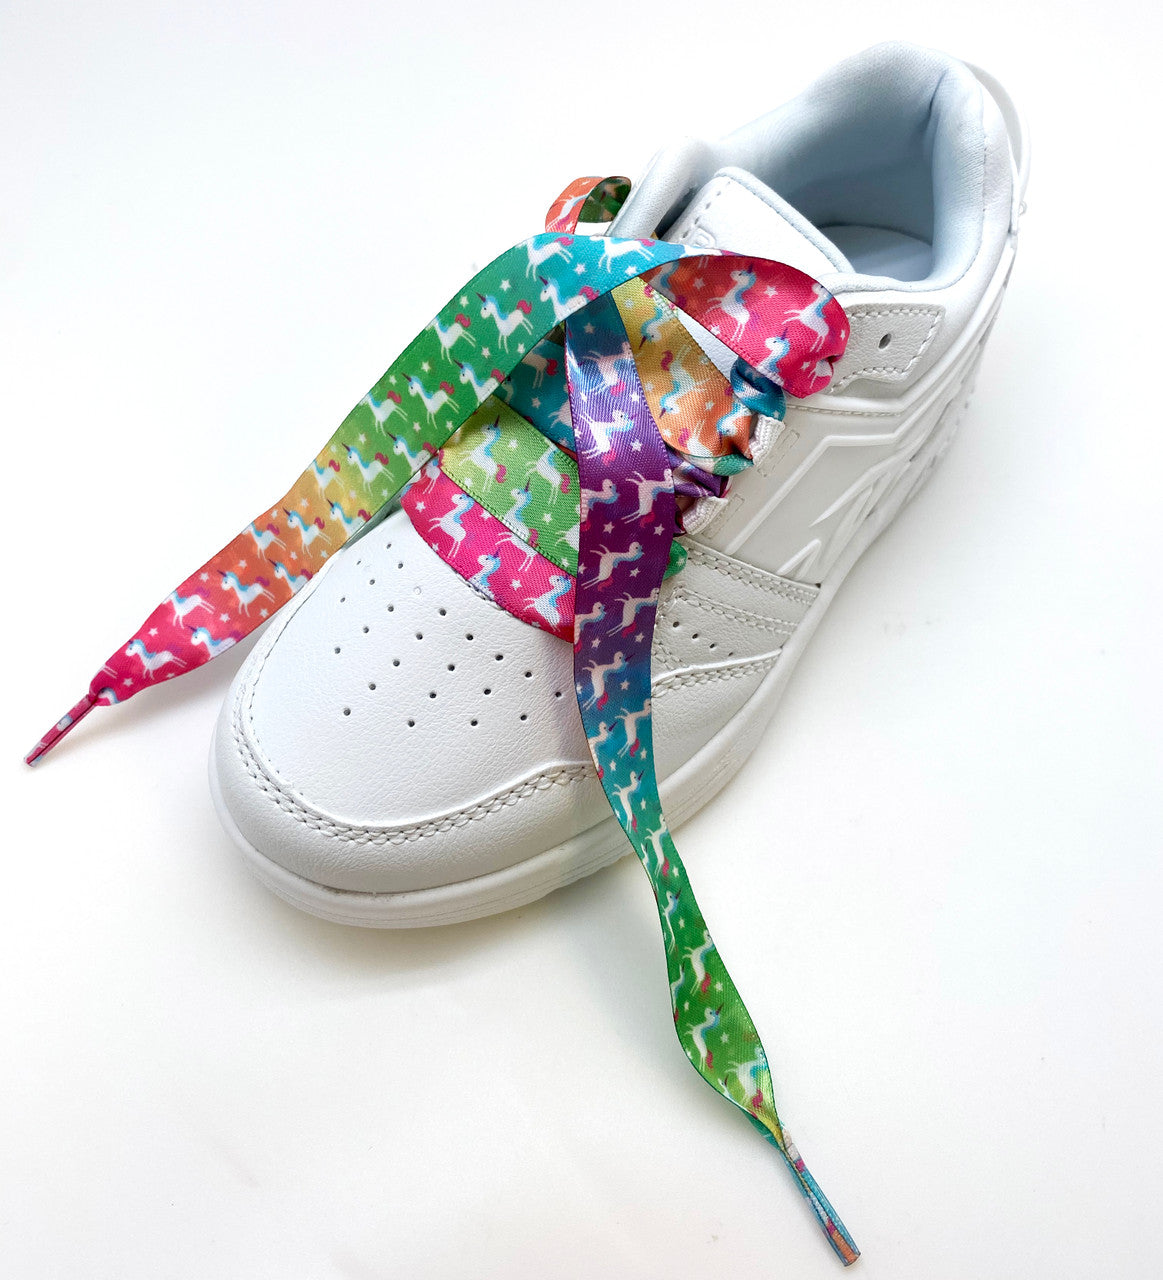 Fun fashion shoelaces will make you want to dance through your day!